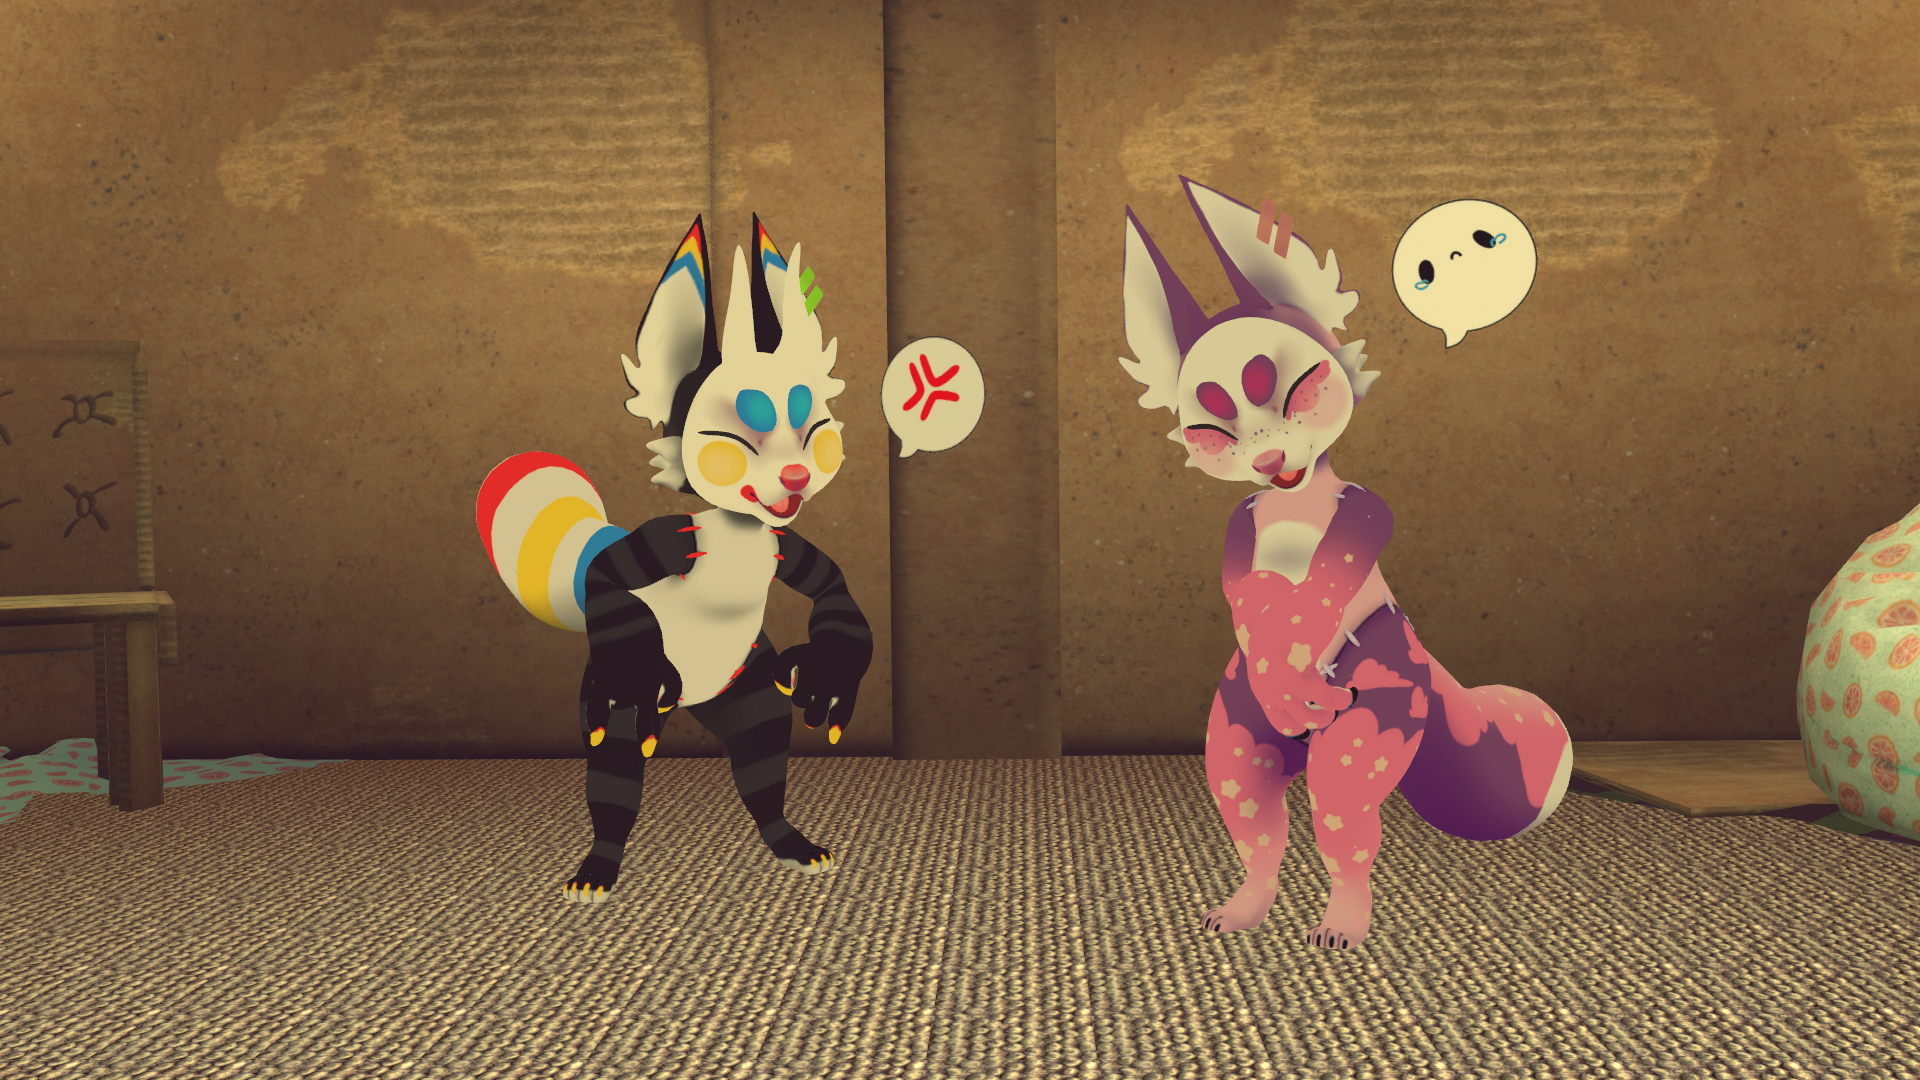 VRChat_1920x1080_2022-03-15_16-06-50.572.png